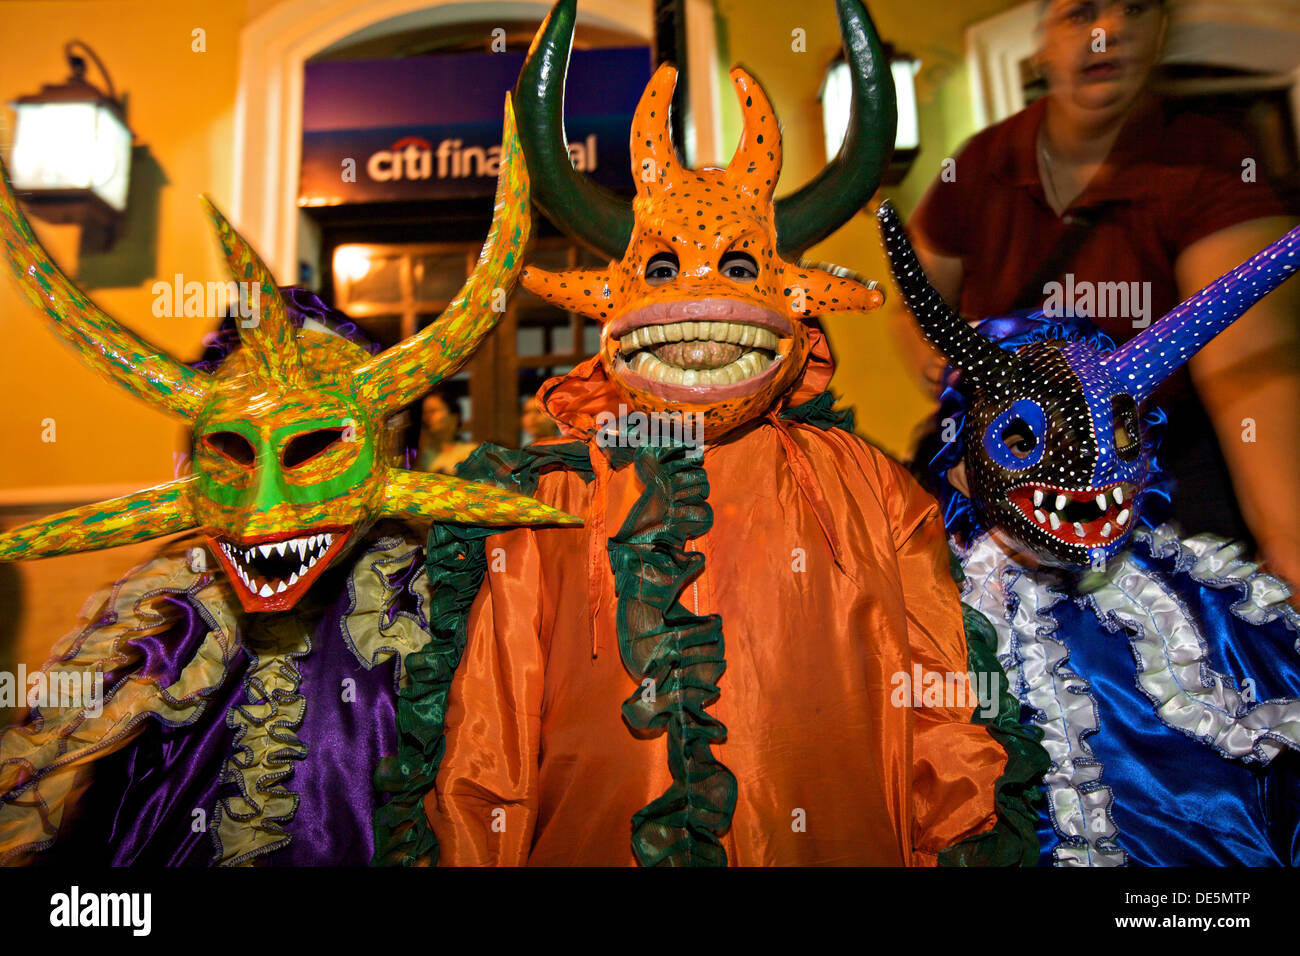 Children costumed revelers called a vejigante in the streets during the Carnaval de Ponce February 21, 2009 in Ponce, Puerto Rico. Vejigantes are a folkloric character representing the devil. Stock Photo